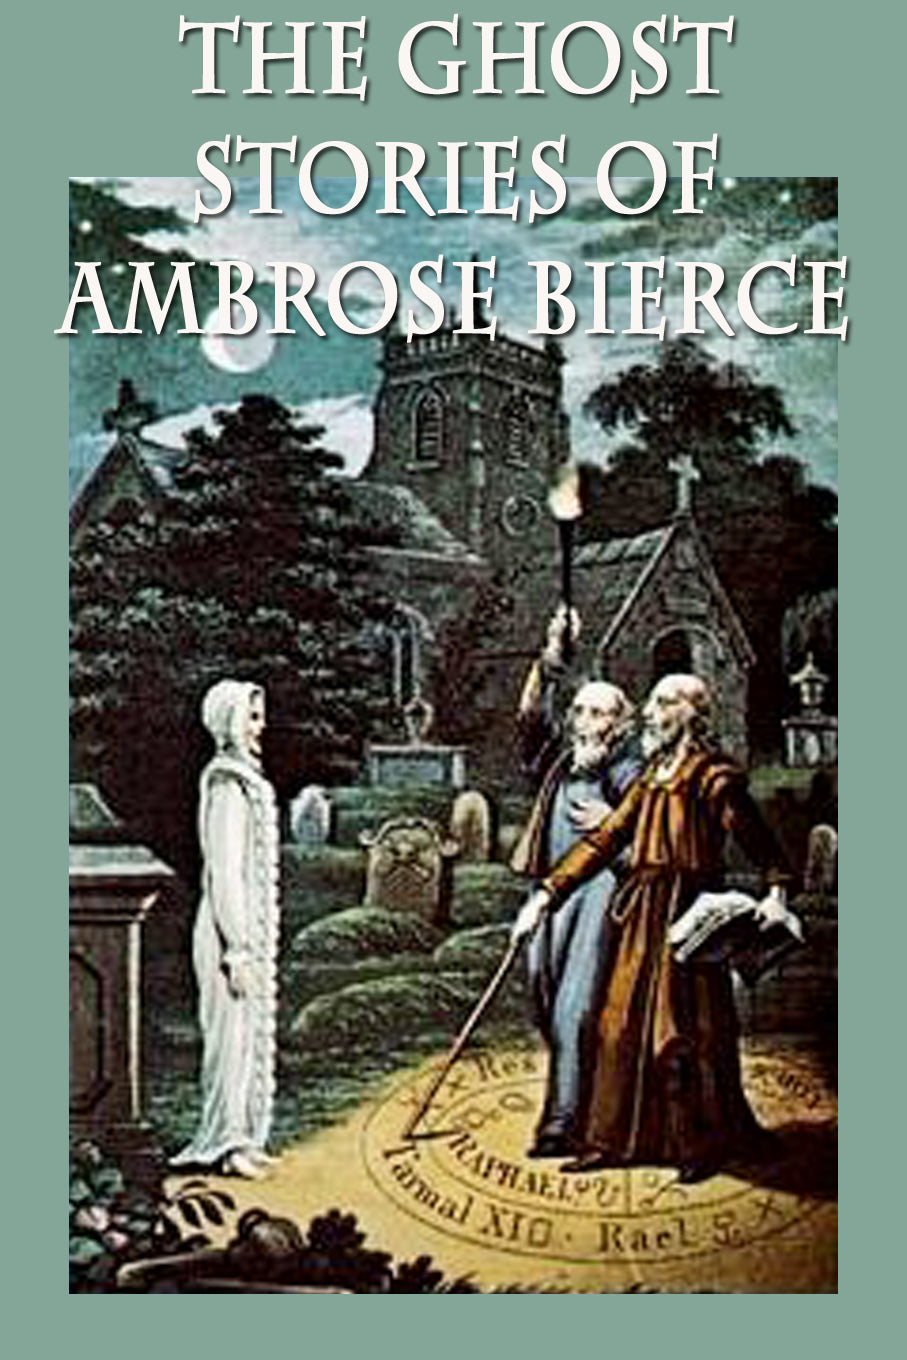 Cover art for The Ghost Stories of Ambrose Bierce.